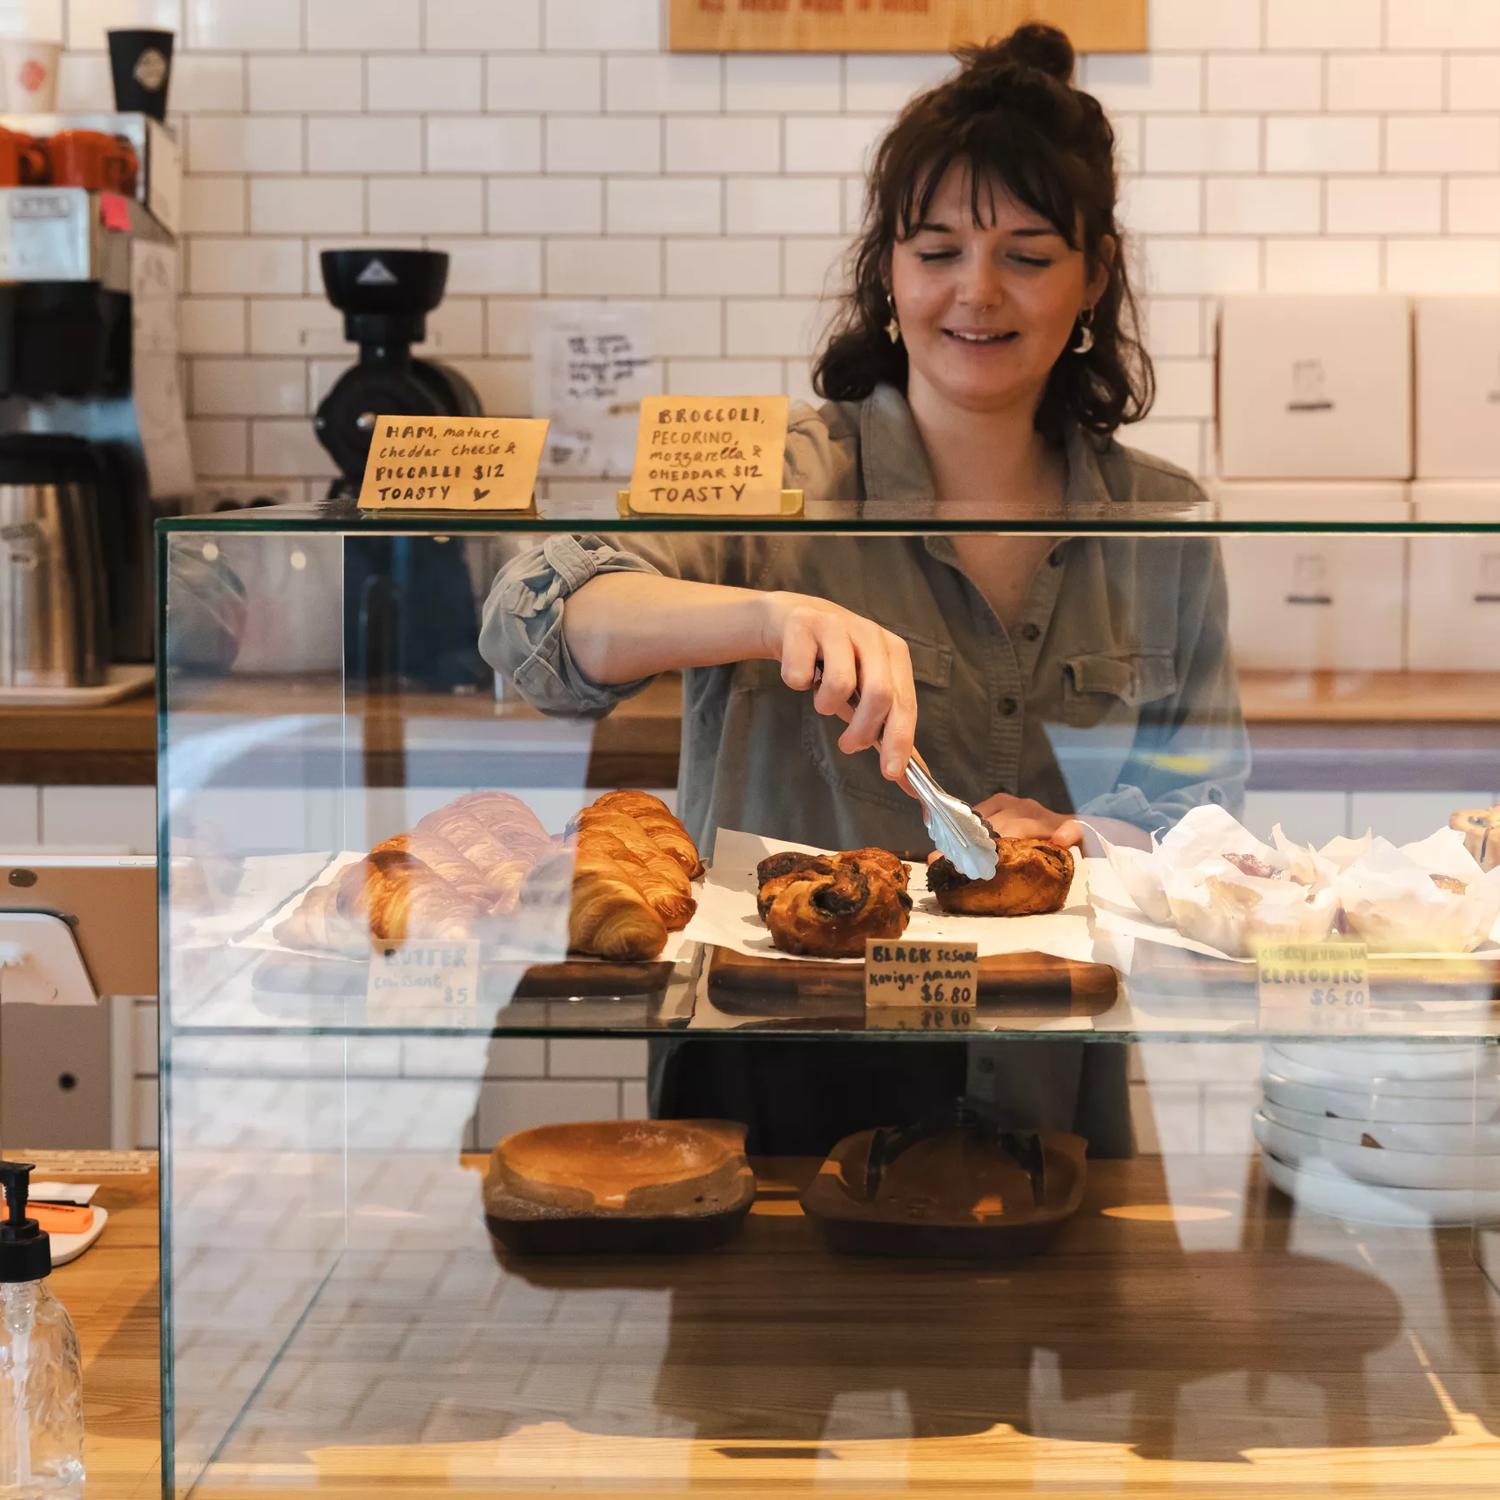 The front counter at Little Grump bakery located in Wellington Central. The back wall is covered in a white subway tile, the counter is a light-coloured wood and a worker is using tongs to pick up a pastry.